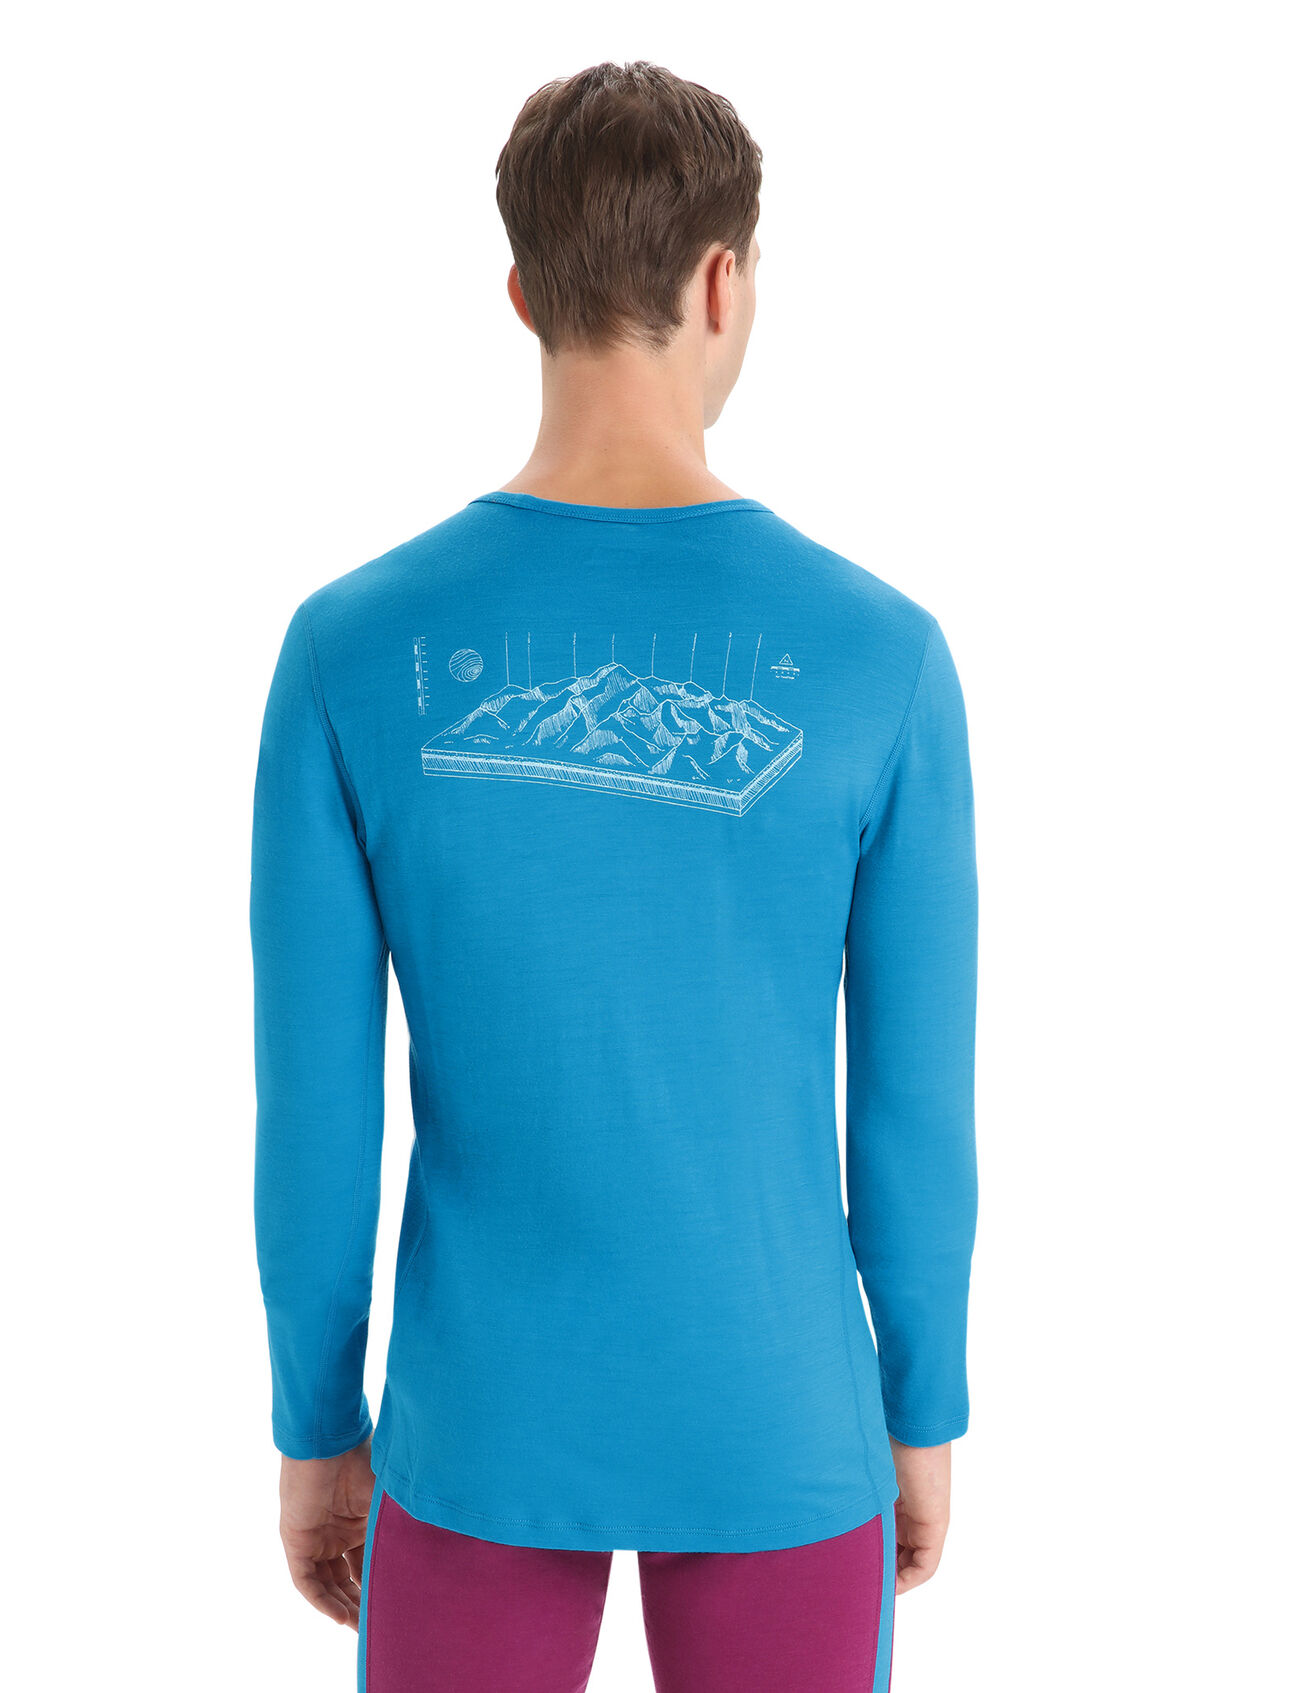 Mens Merino 200 Oasis Long Sleeve Crew Neck Thermal Top Alps 3D The benchmark against which all others are judged, the 200 Oasis Long Sleeve Crewe Alps 3D features our most versatile merino jersey fabric for year-round layering performance across any activity, with a hand-drawn mountain sketch for added style.